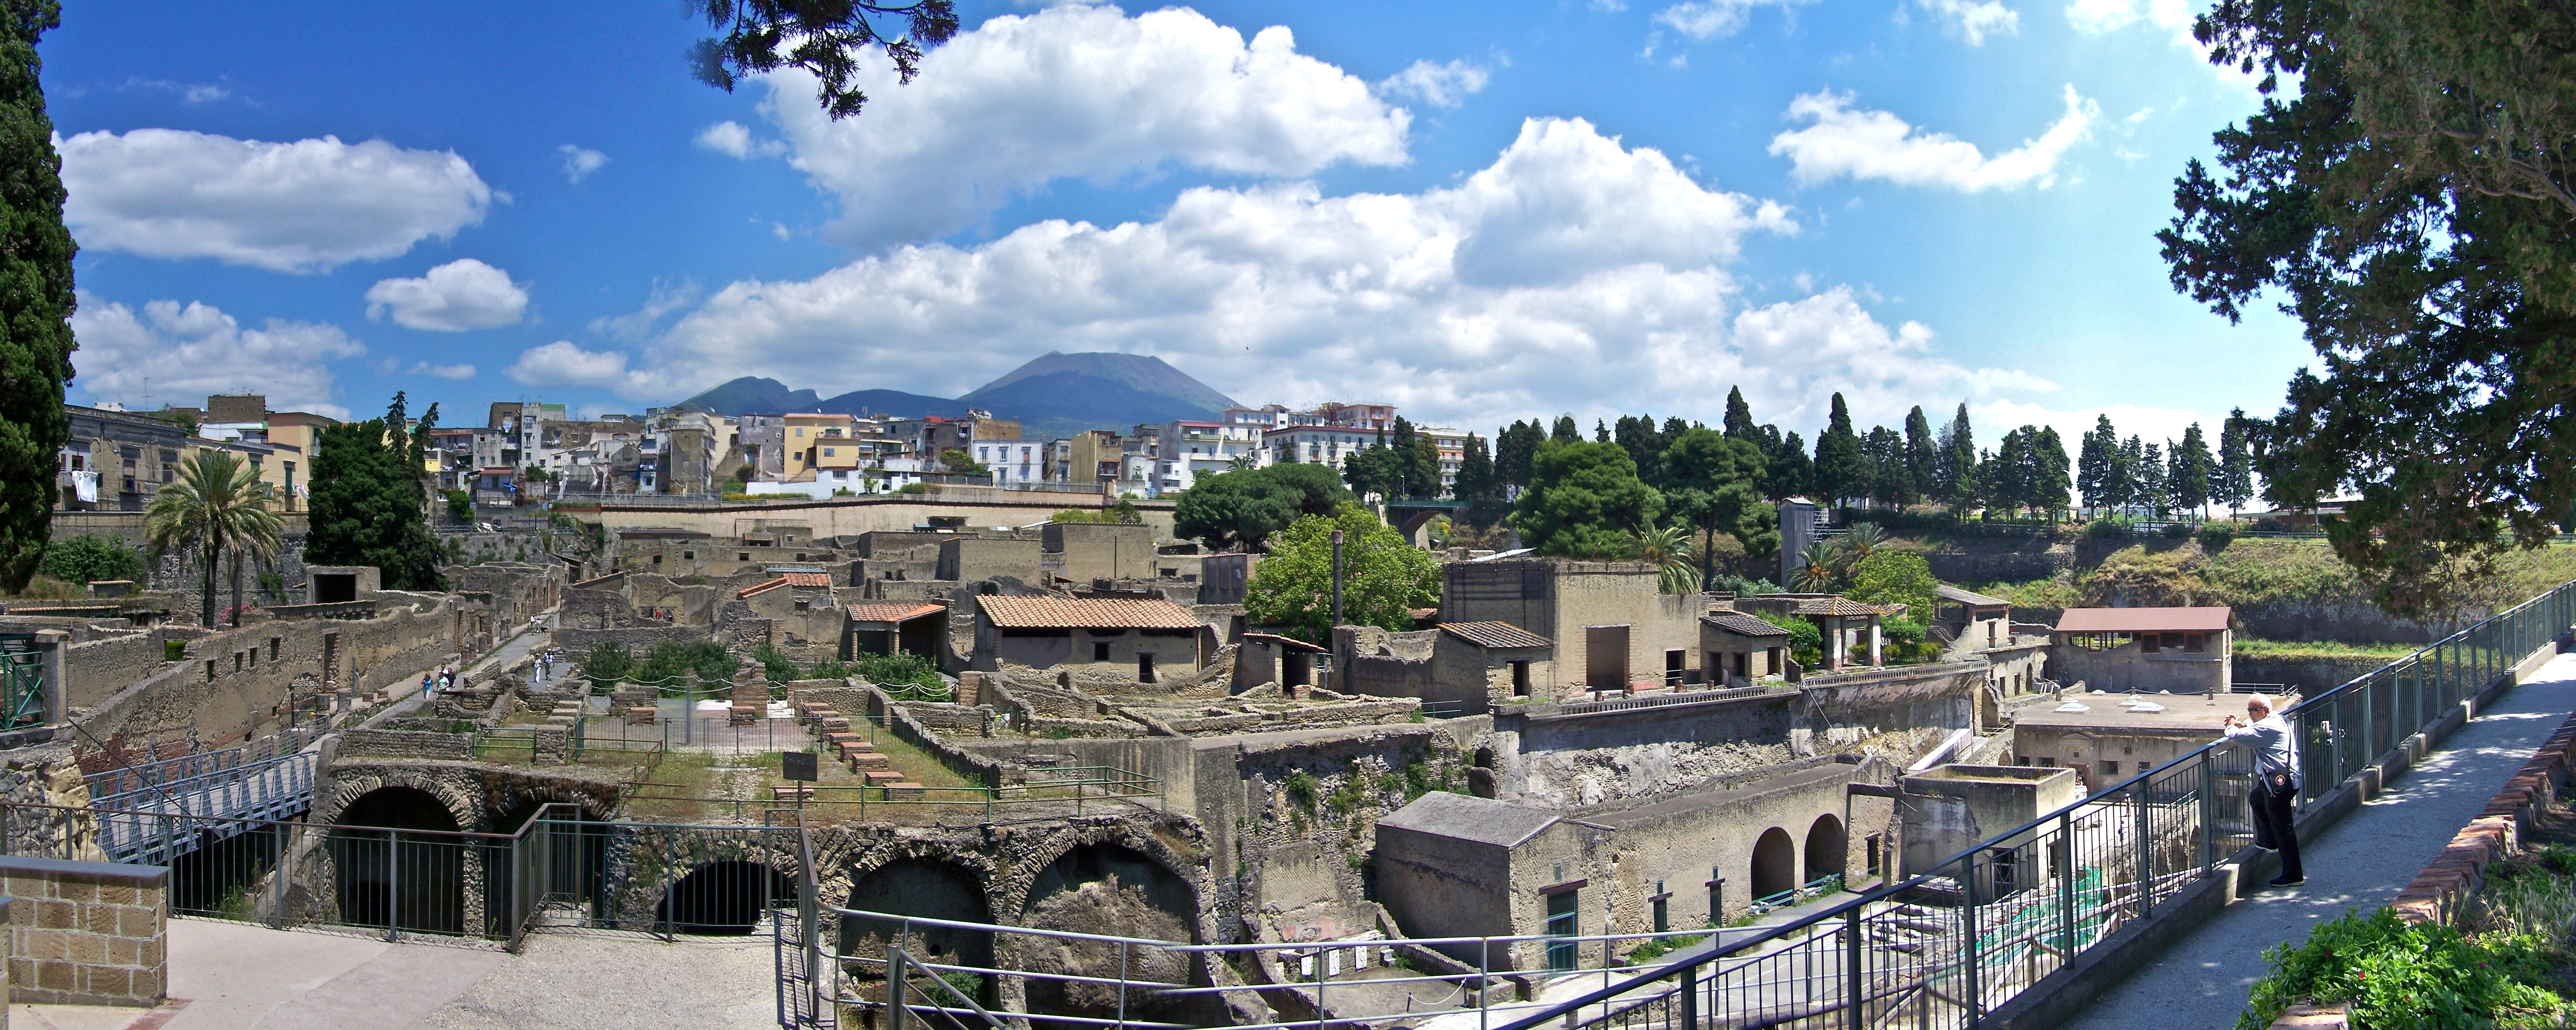 Herculaneum, Roman seaside town, buried by the eruption of Vesuvius in 79 AD - superb archaeological site